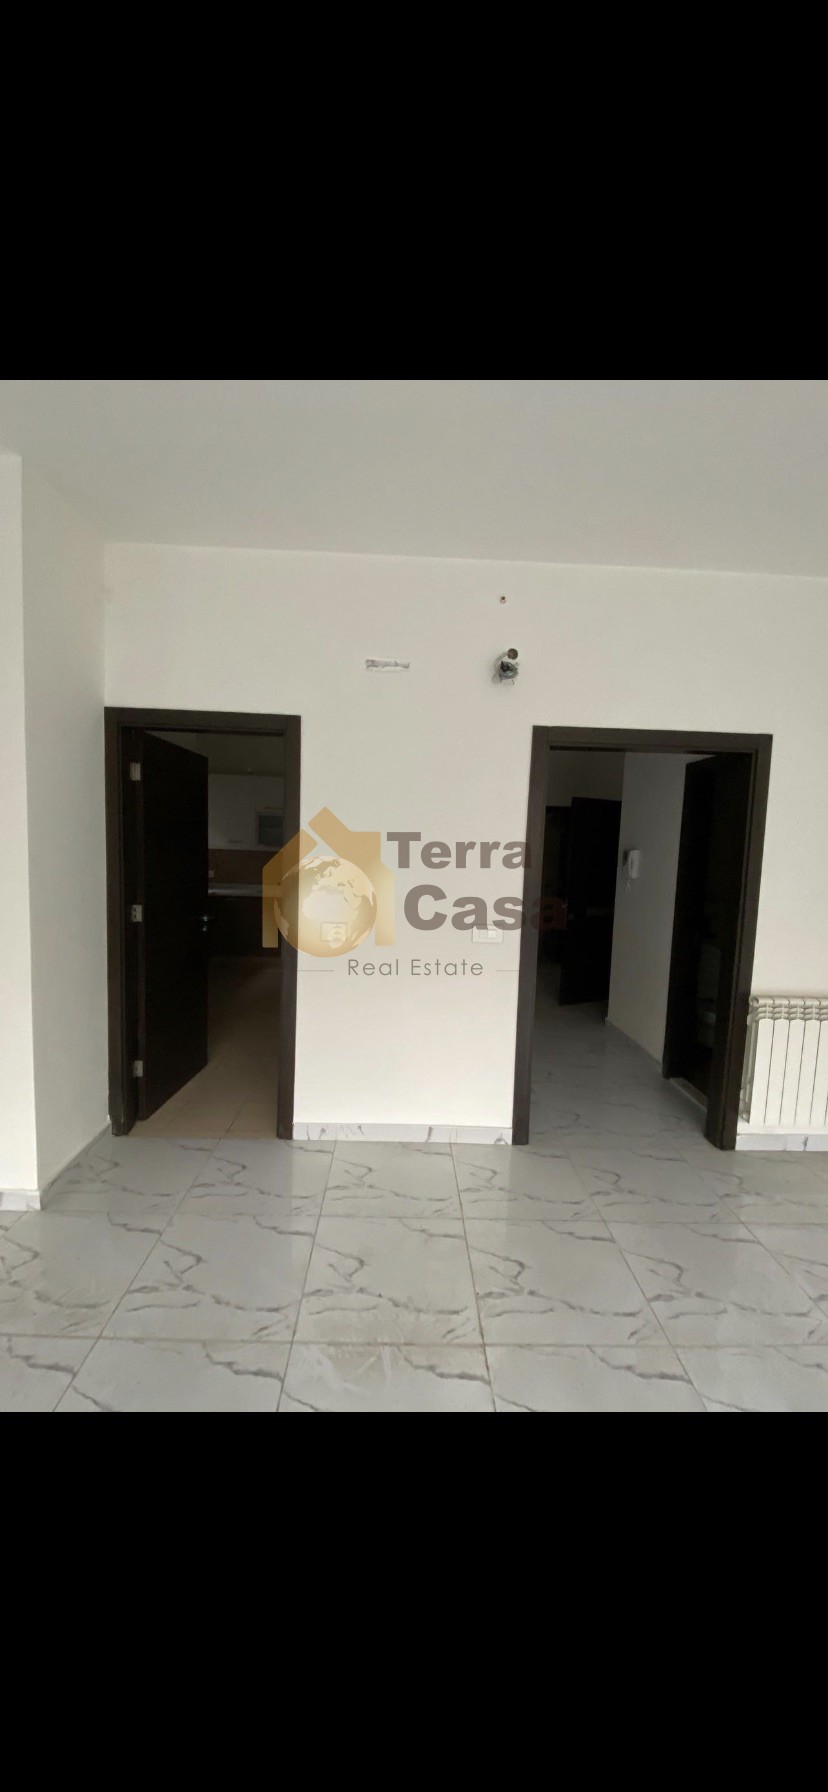 Amazing apartment in hazmieh with terrace and a very comfortable location